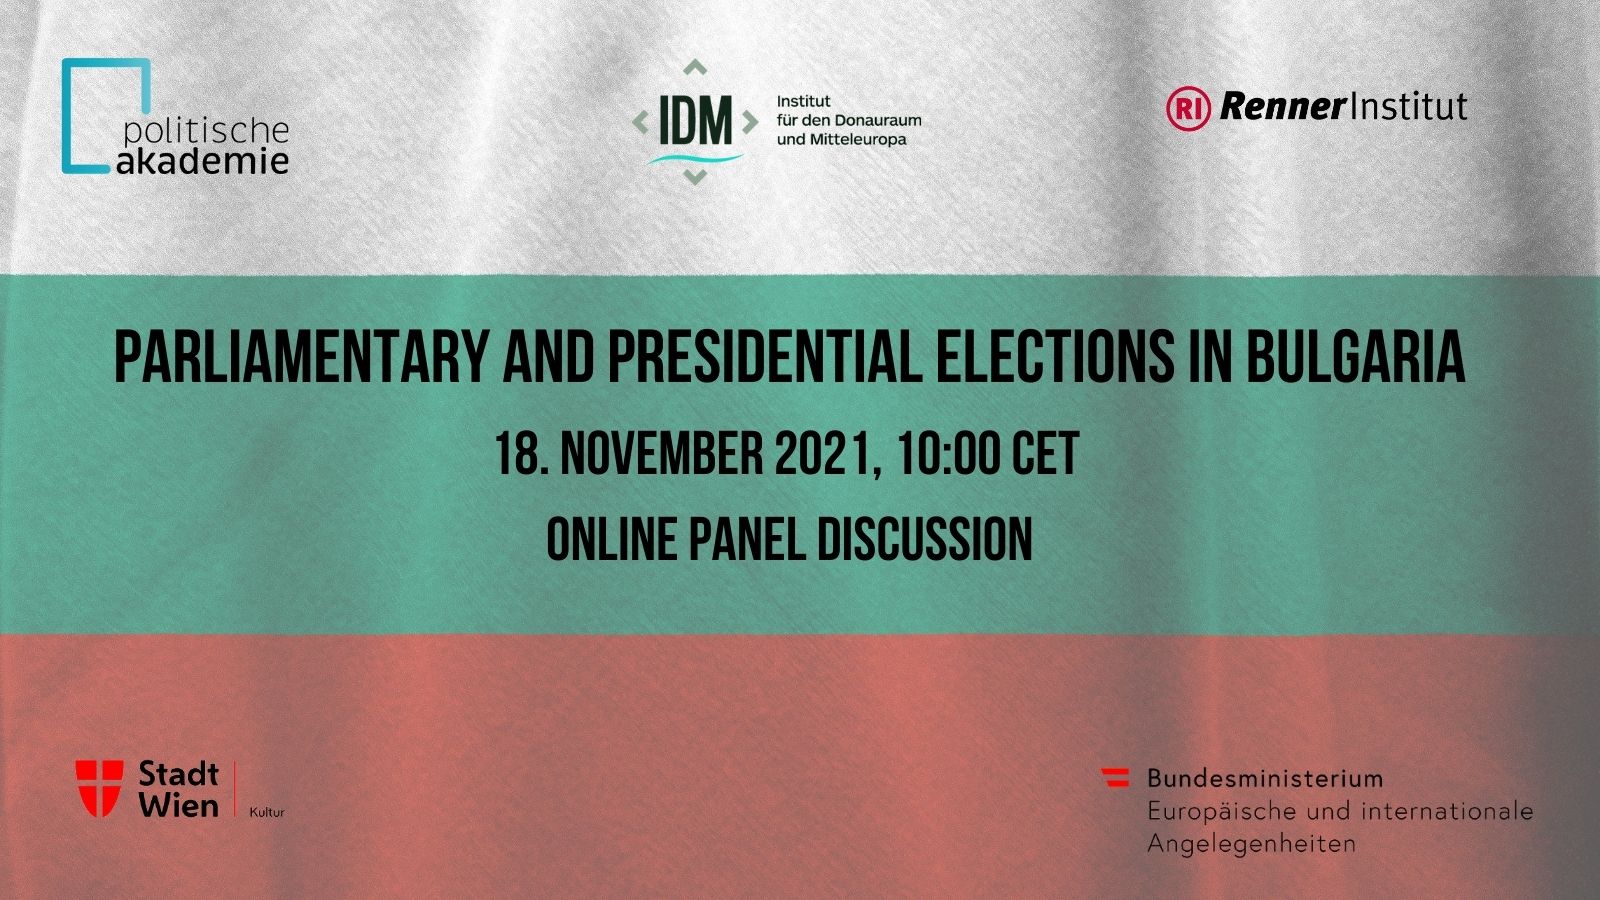 Online panel discussion "Parliamentary and Presidential Elections in Bulgaria"